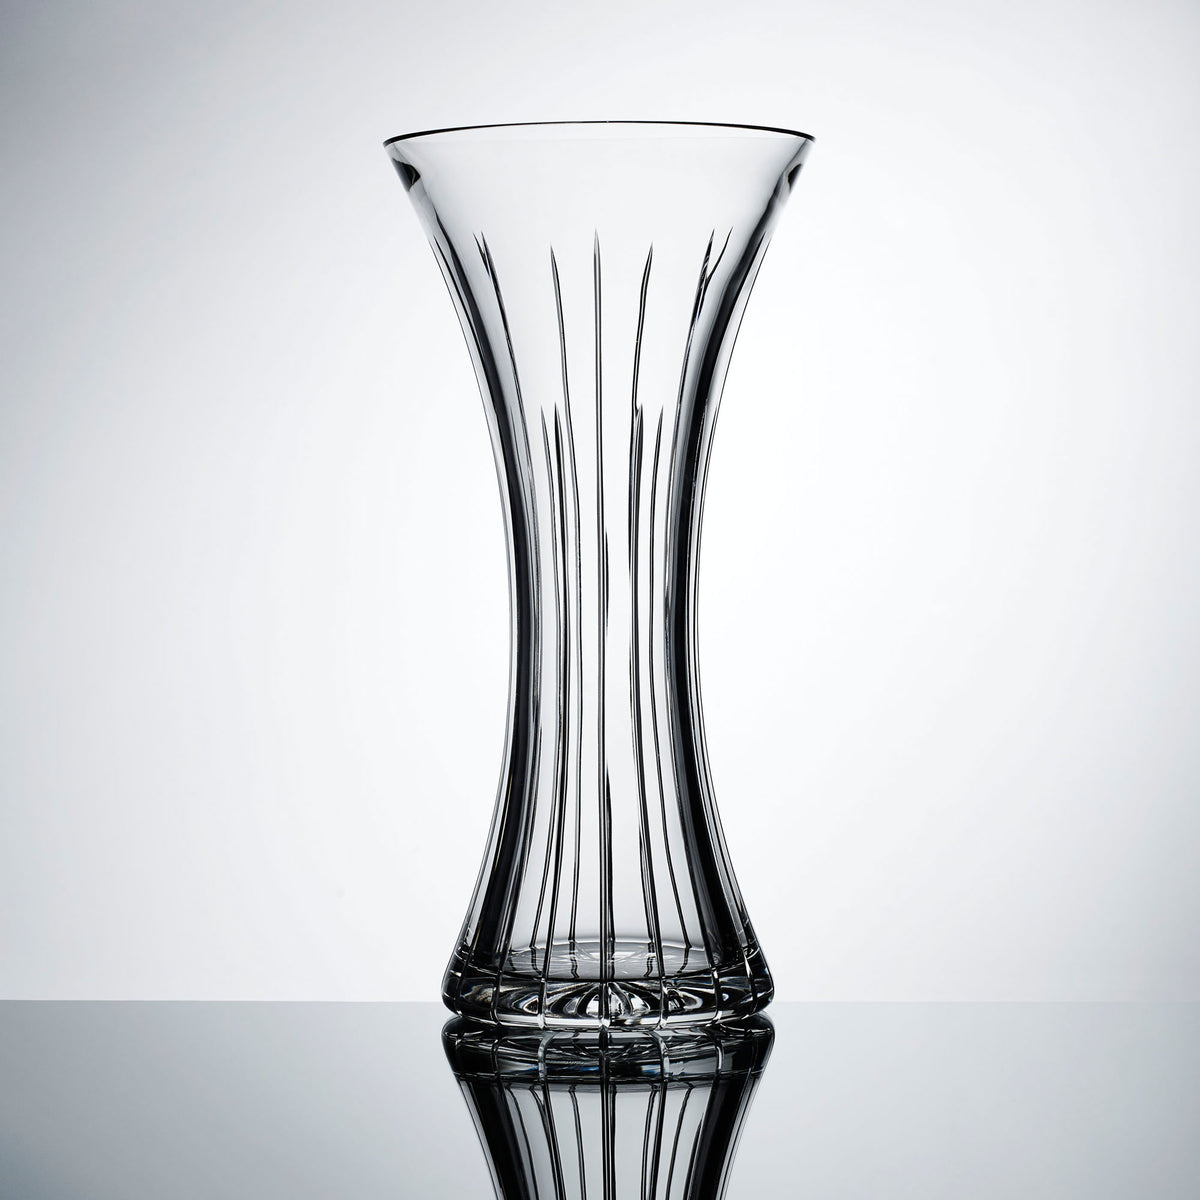 Trafalgar Fluted Vase | Luxury Home Accessories & Gifts | LINLEY